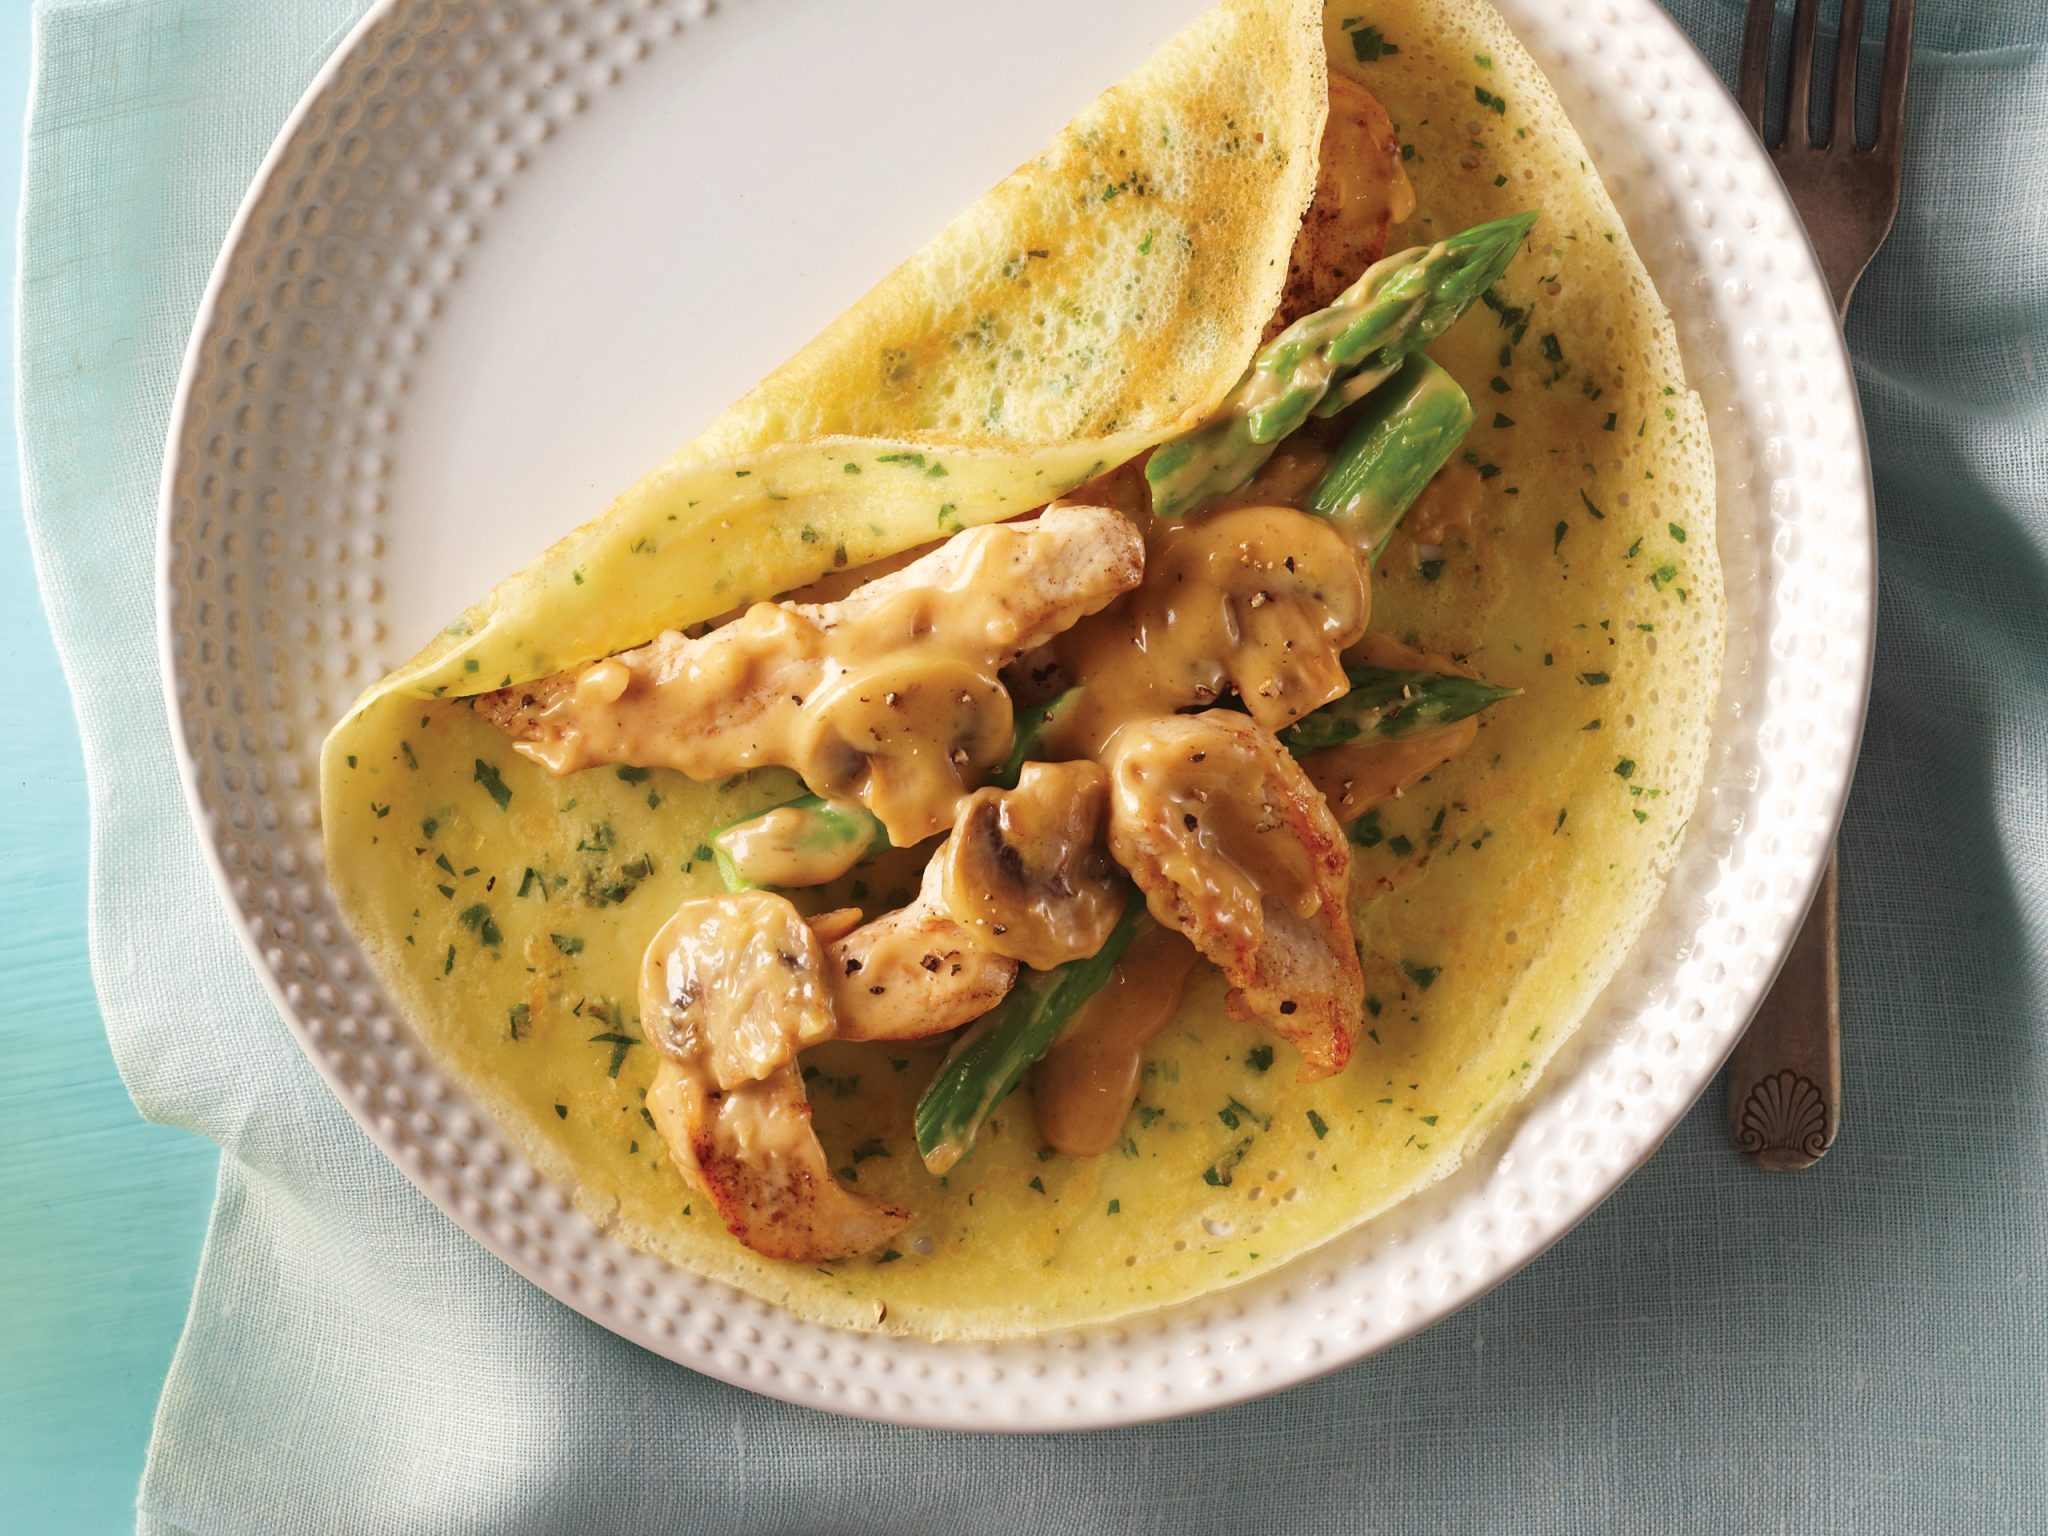 Herbed Crepes with Chicken, Asparagus and Mushrooms